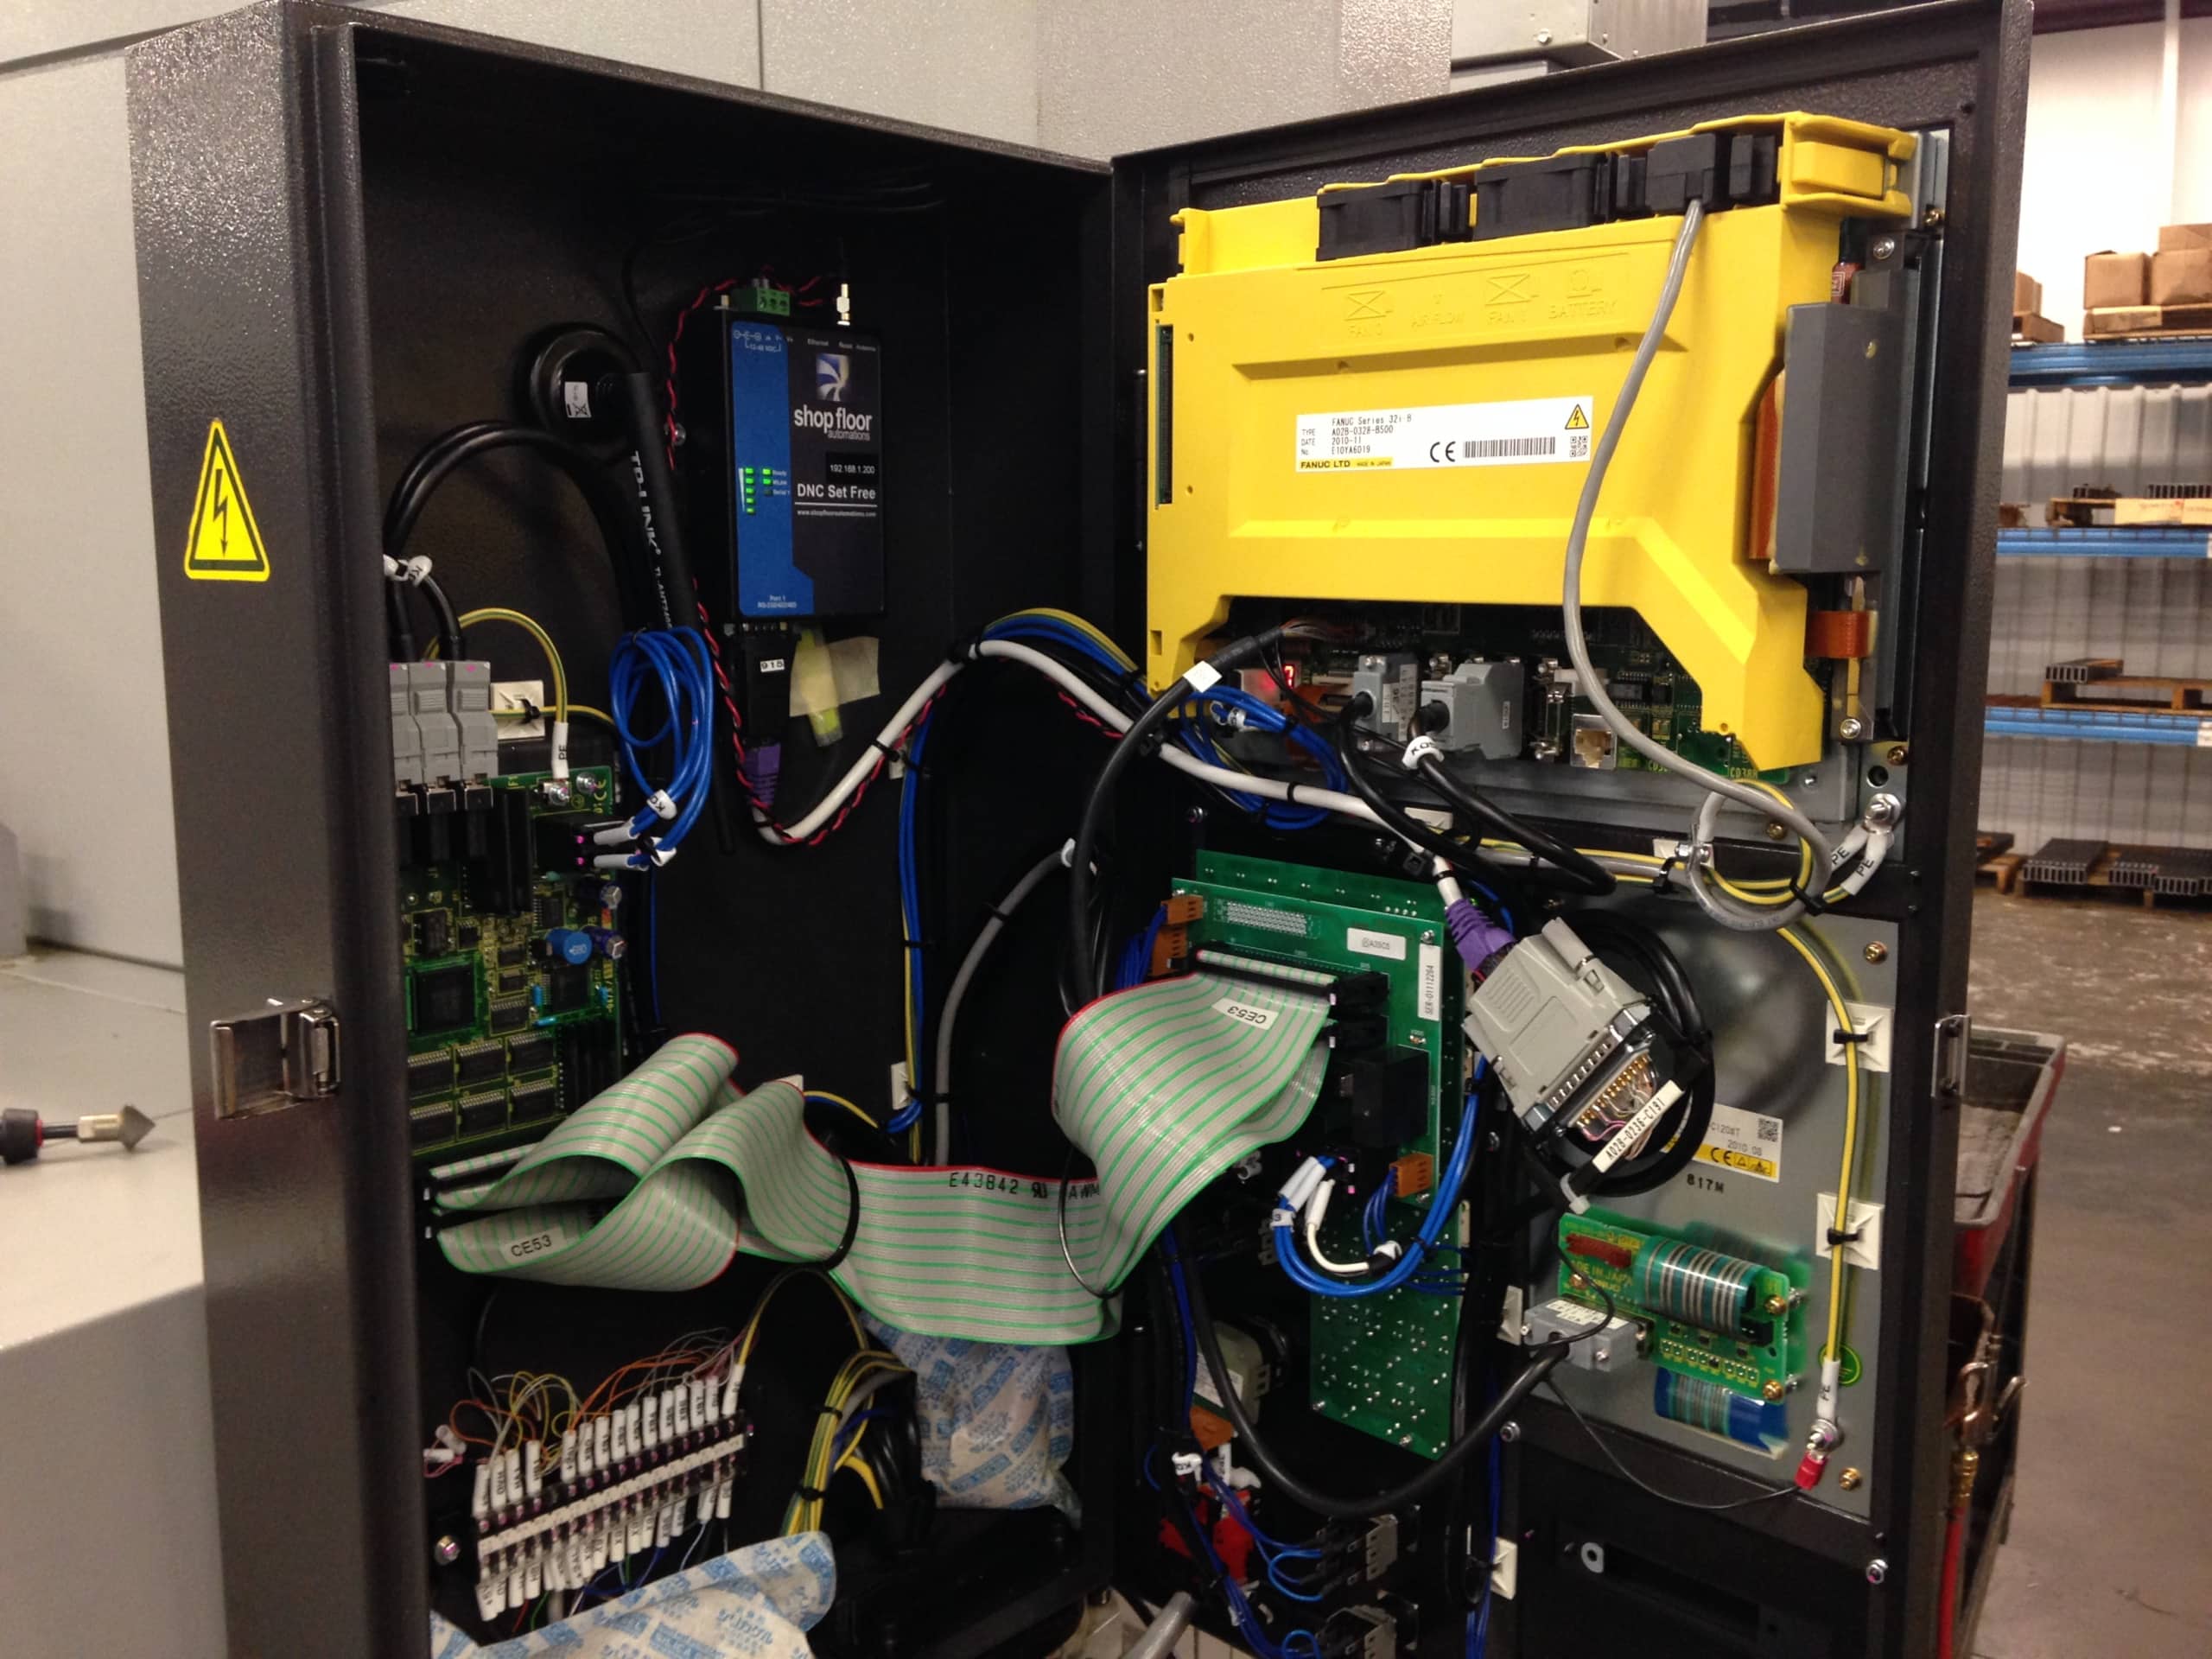 The door of a Fanuc CNC machine is opened to show that a Wi-fi Connect unit is mounted inside, adding a wireless DNC network.